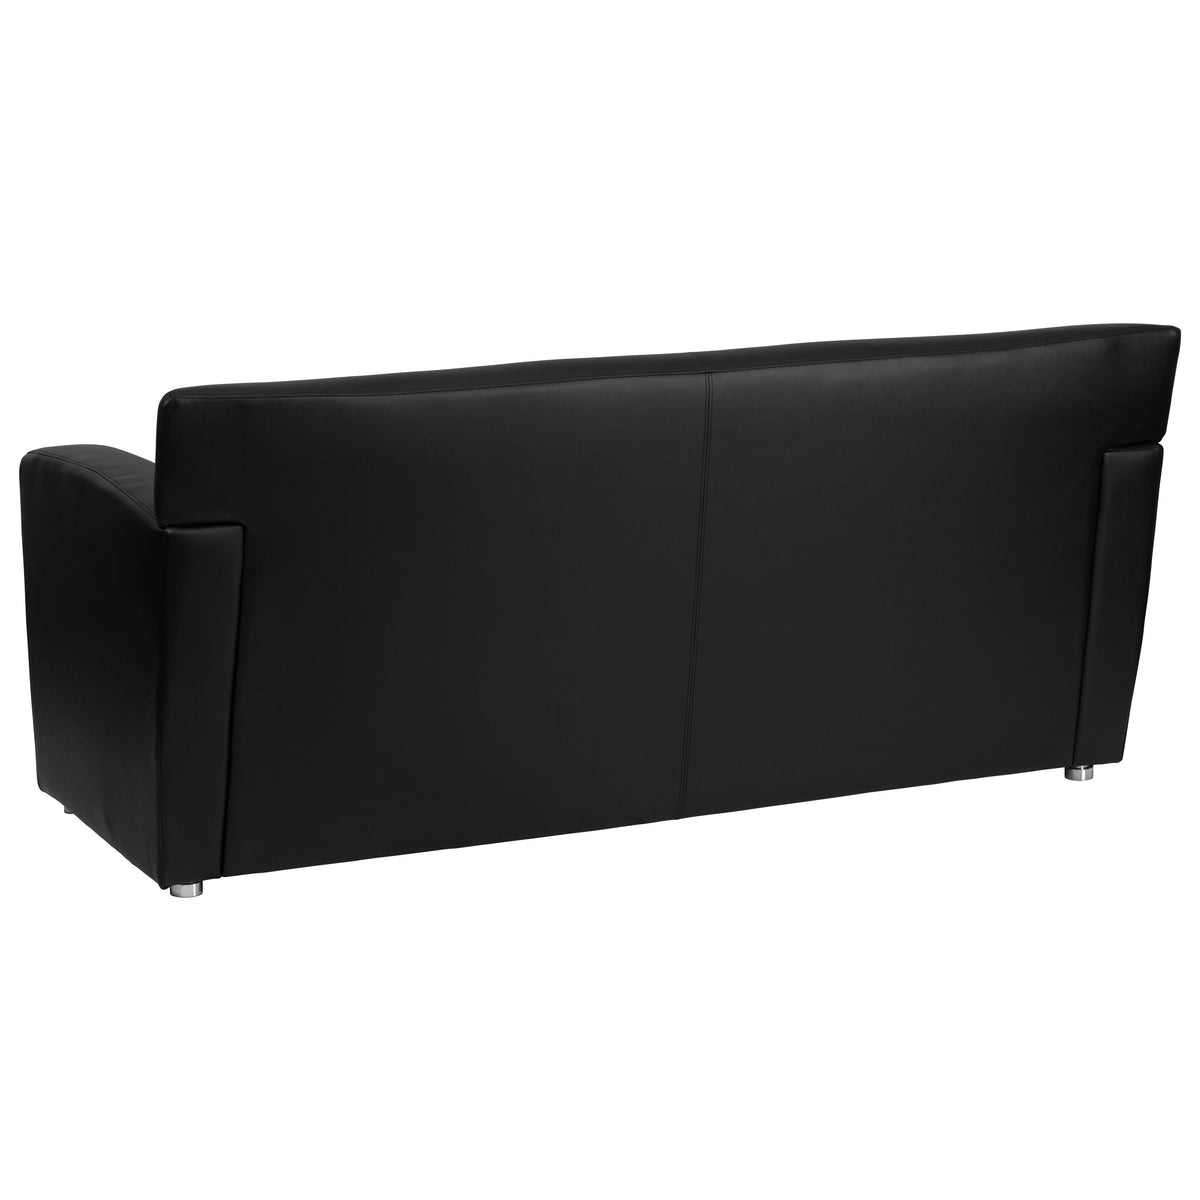 Black |#| Black LeatherSoft Sofa with Extended Panel Arms - Reception and Lounge Seating